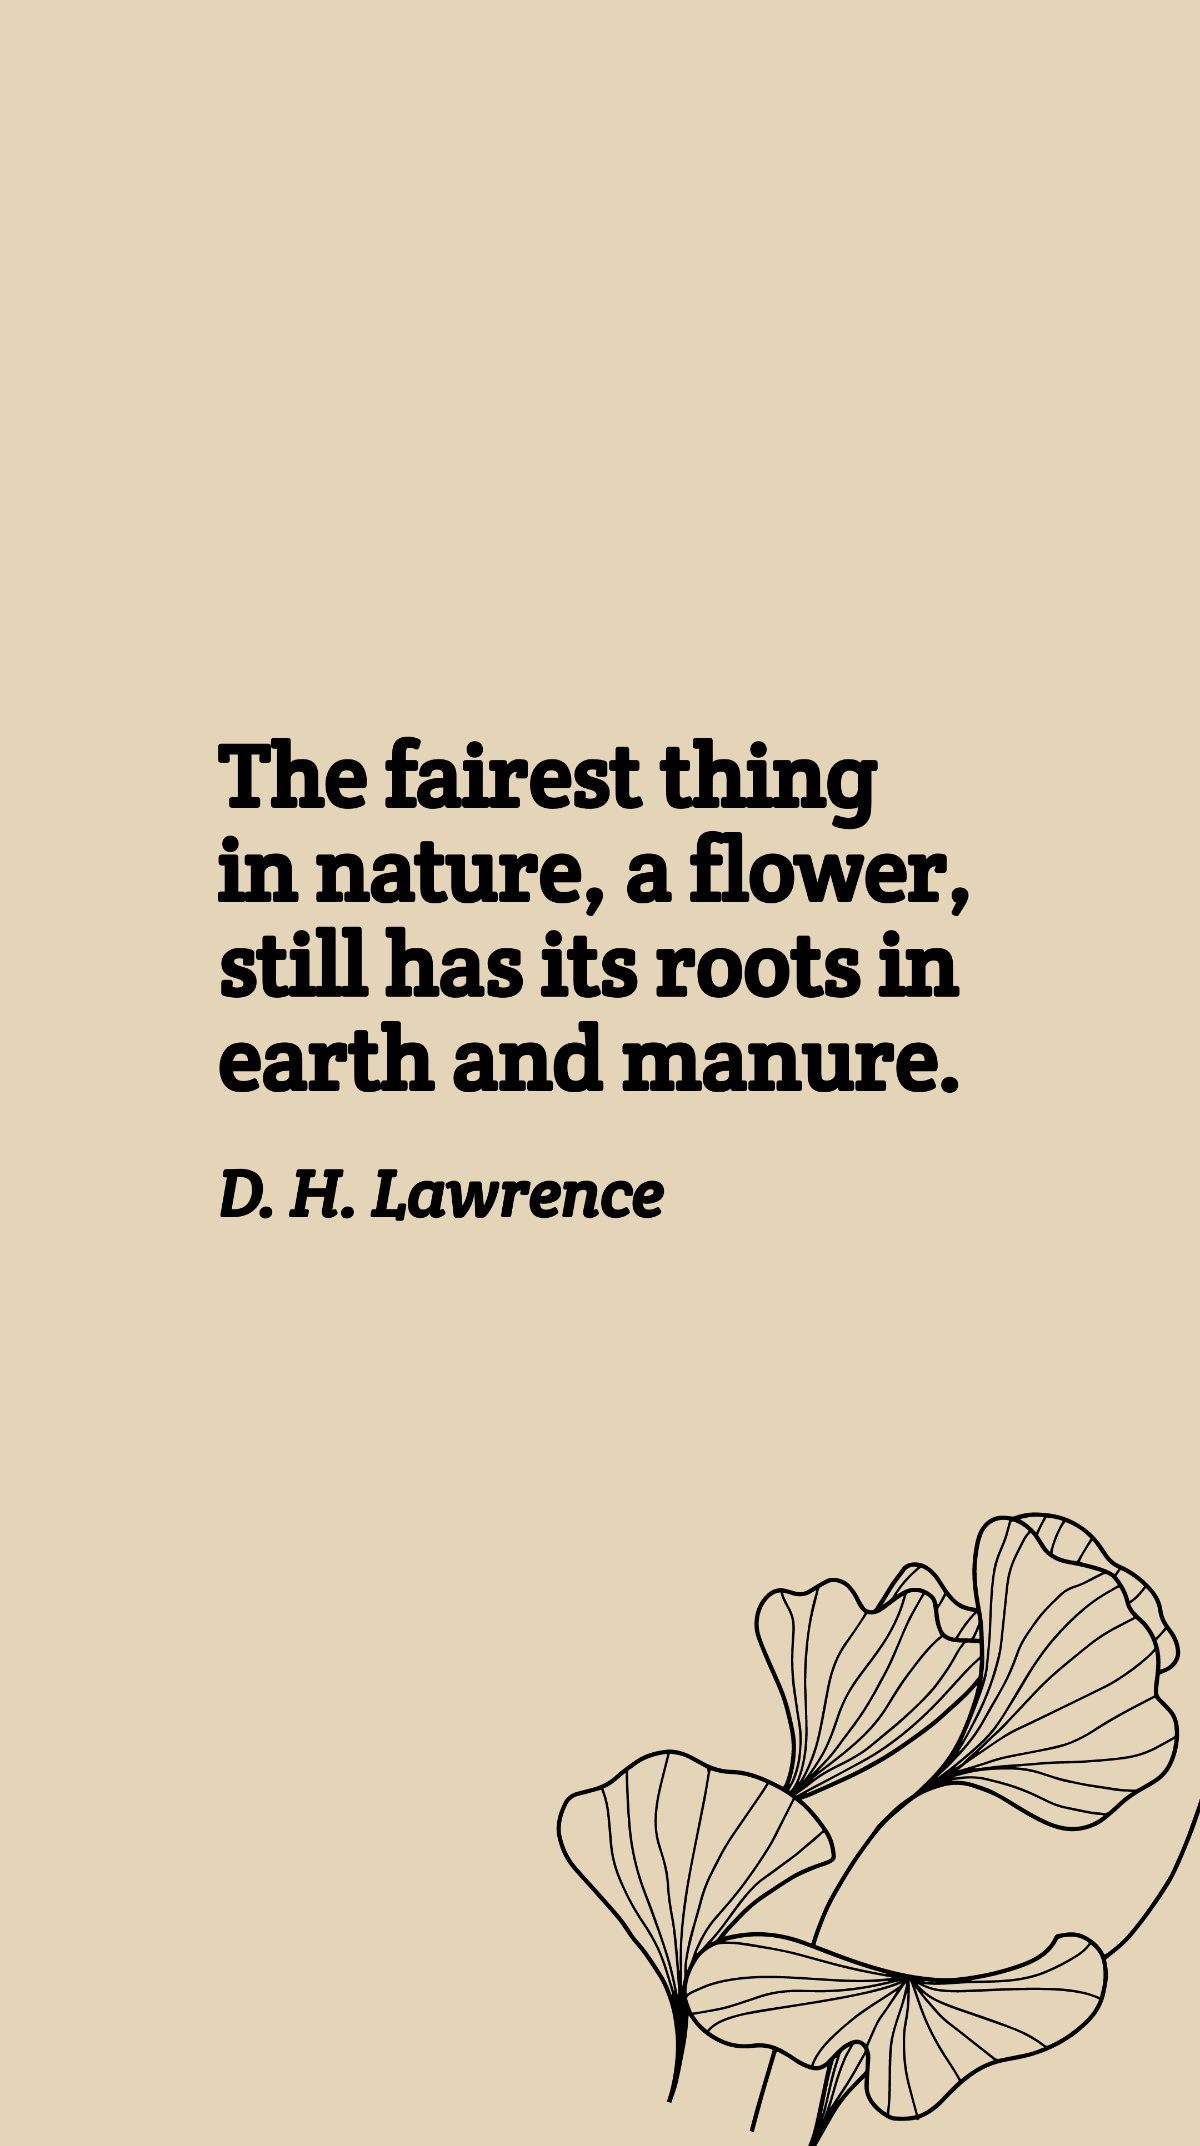 Free D. H. Lawrence - The fairest thing in nature, a flower, still has its roots in earth and manure. Template